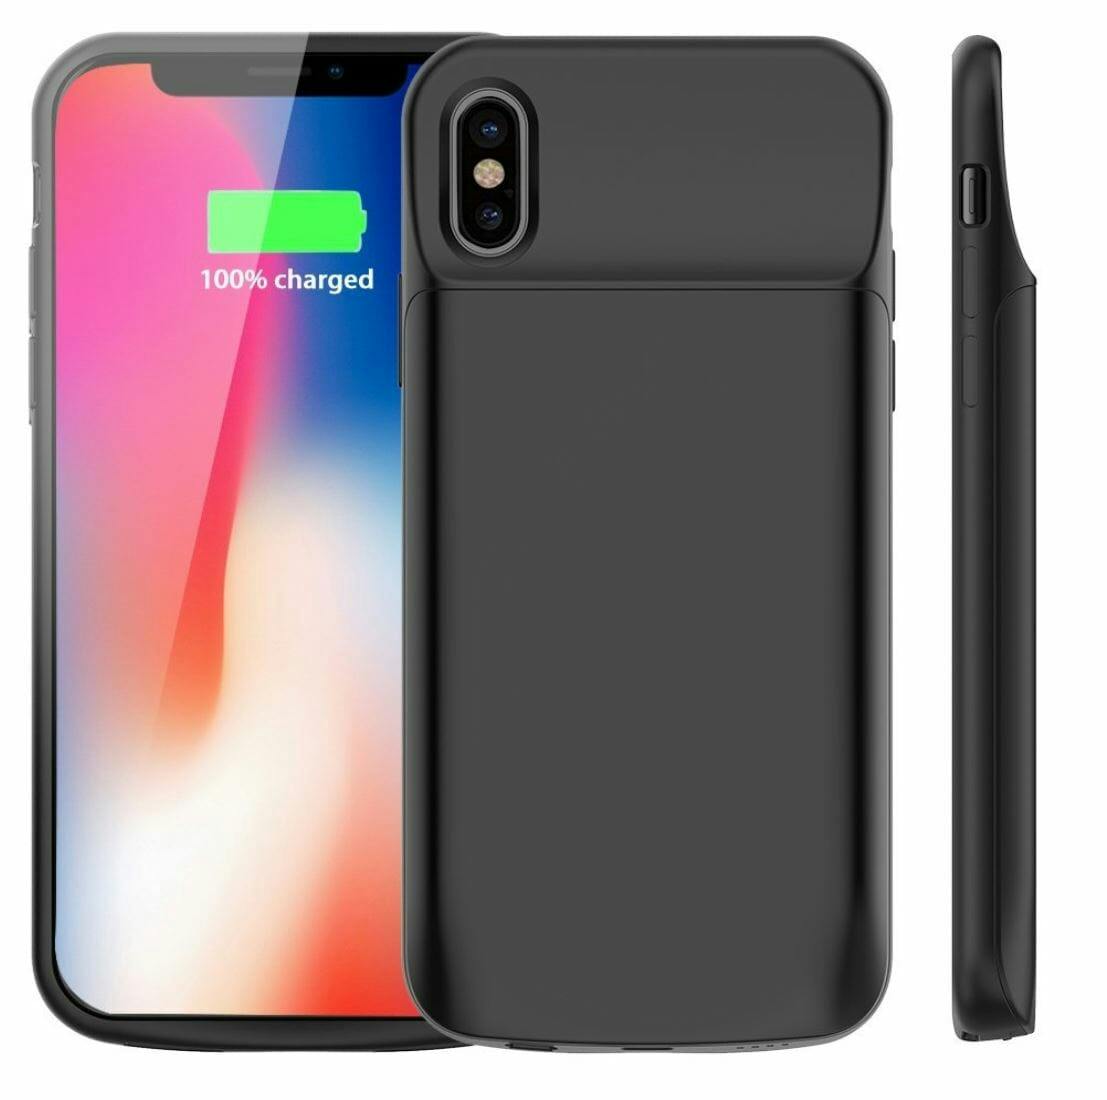 iphone x case vproof battery 6,000mah case